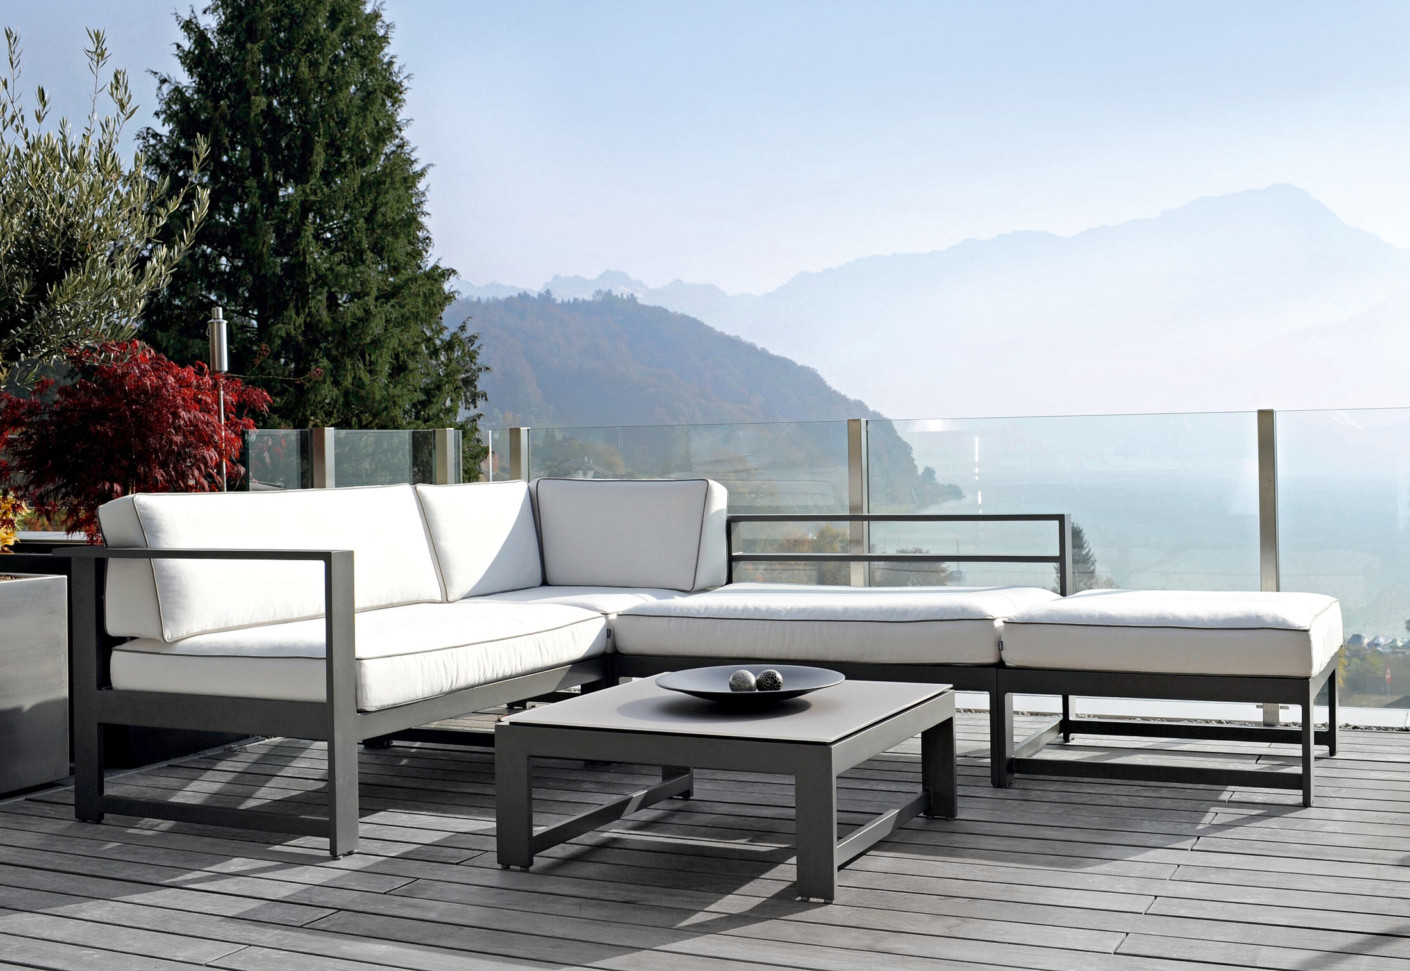  Summer  Sectional Modular Sofa  by Rausch Couture Outdoor